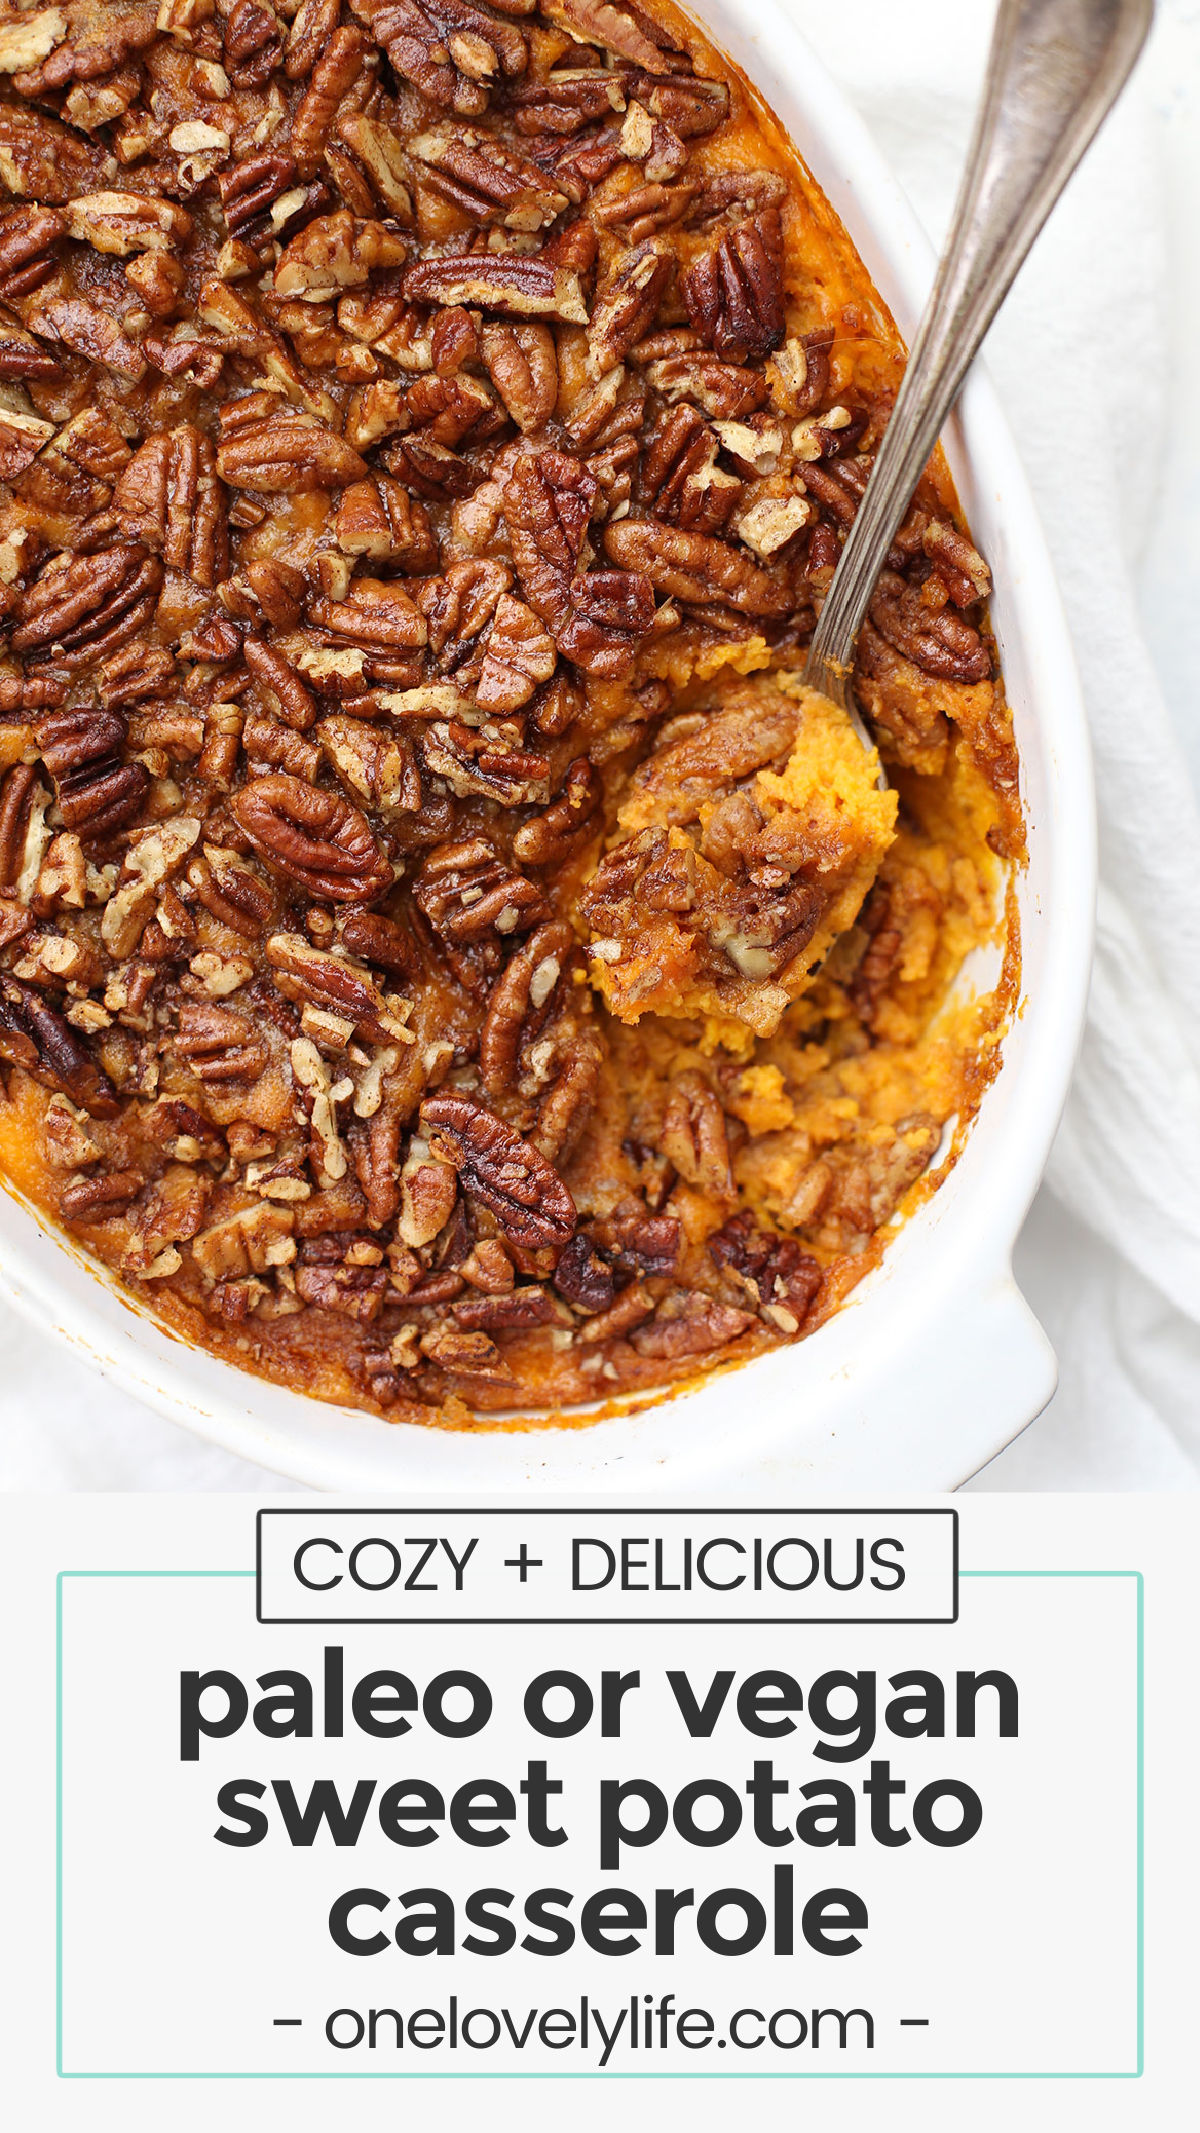 Paleo (or Vegan!) Sweet Potato Casserole - Gluten free, naturally sweetened, and totally delicious! // Vegan sweet potato casserole recipe // paleo sweet potato casserole recipe // healthy sweet potato casserole recipe // dairy free sweet potato casserole recipe // gluten free sweet potato casserole recipe // Thanksgiving side dish // Paleo thanksgiving // healthy thanksgiving recipe